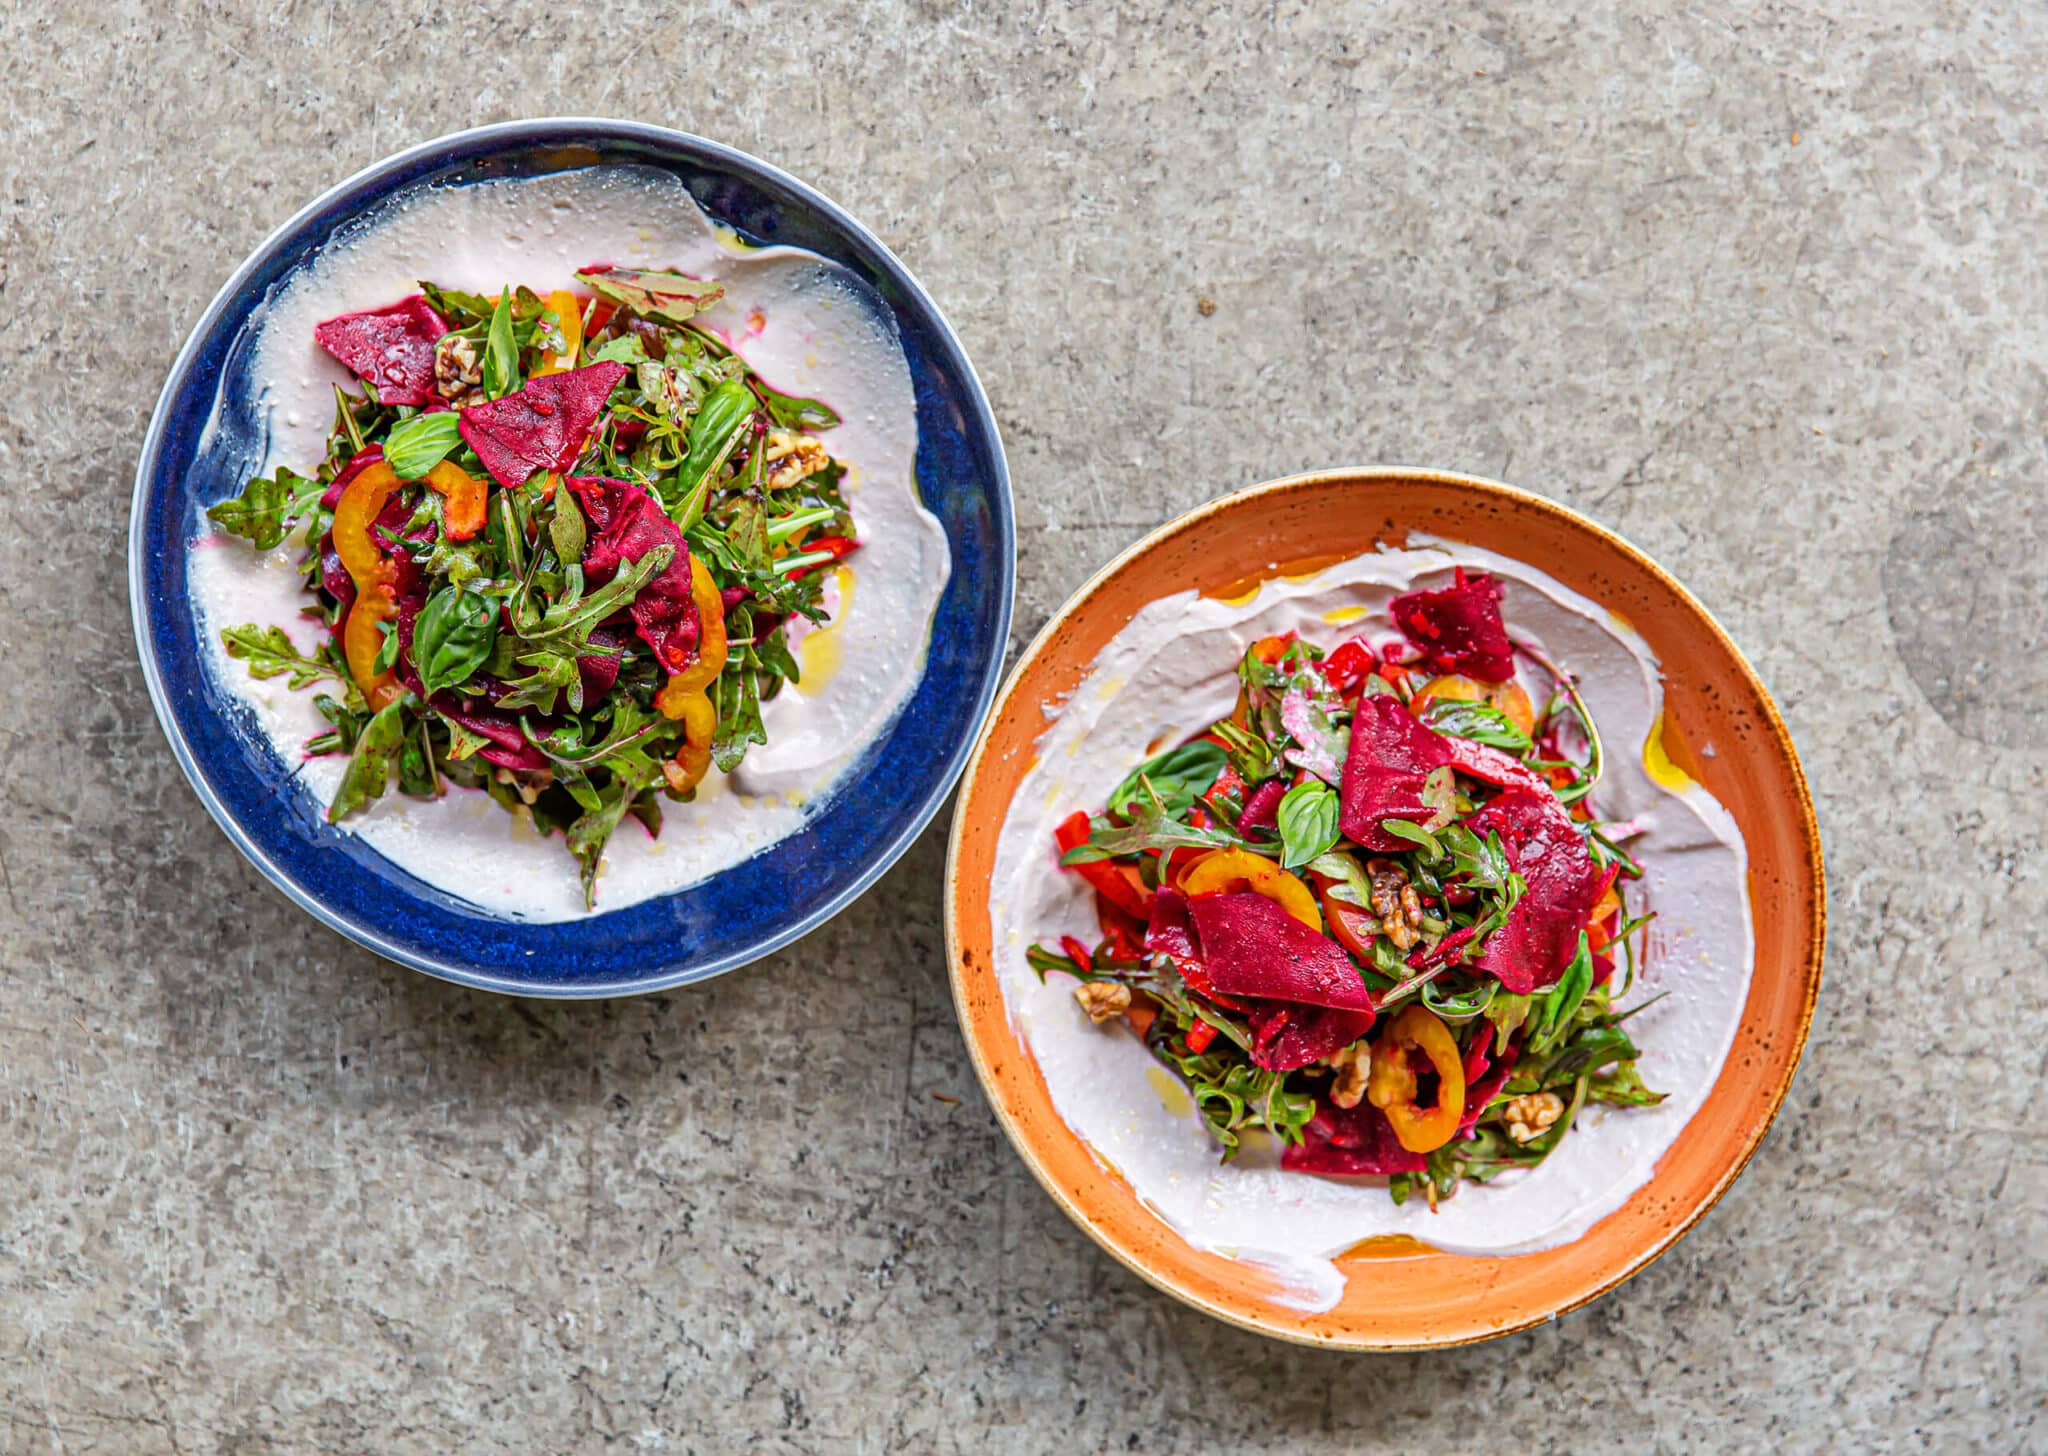 NEW! FRESH, DELICIOUS BEETROOT SALAD